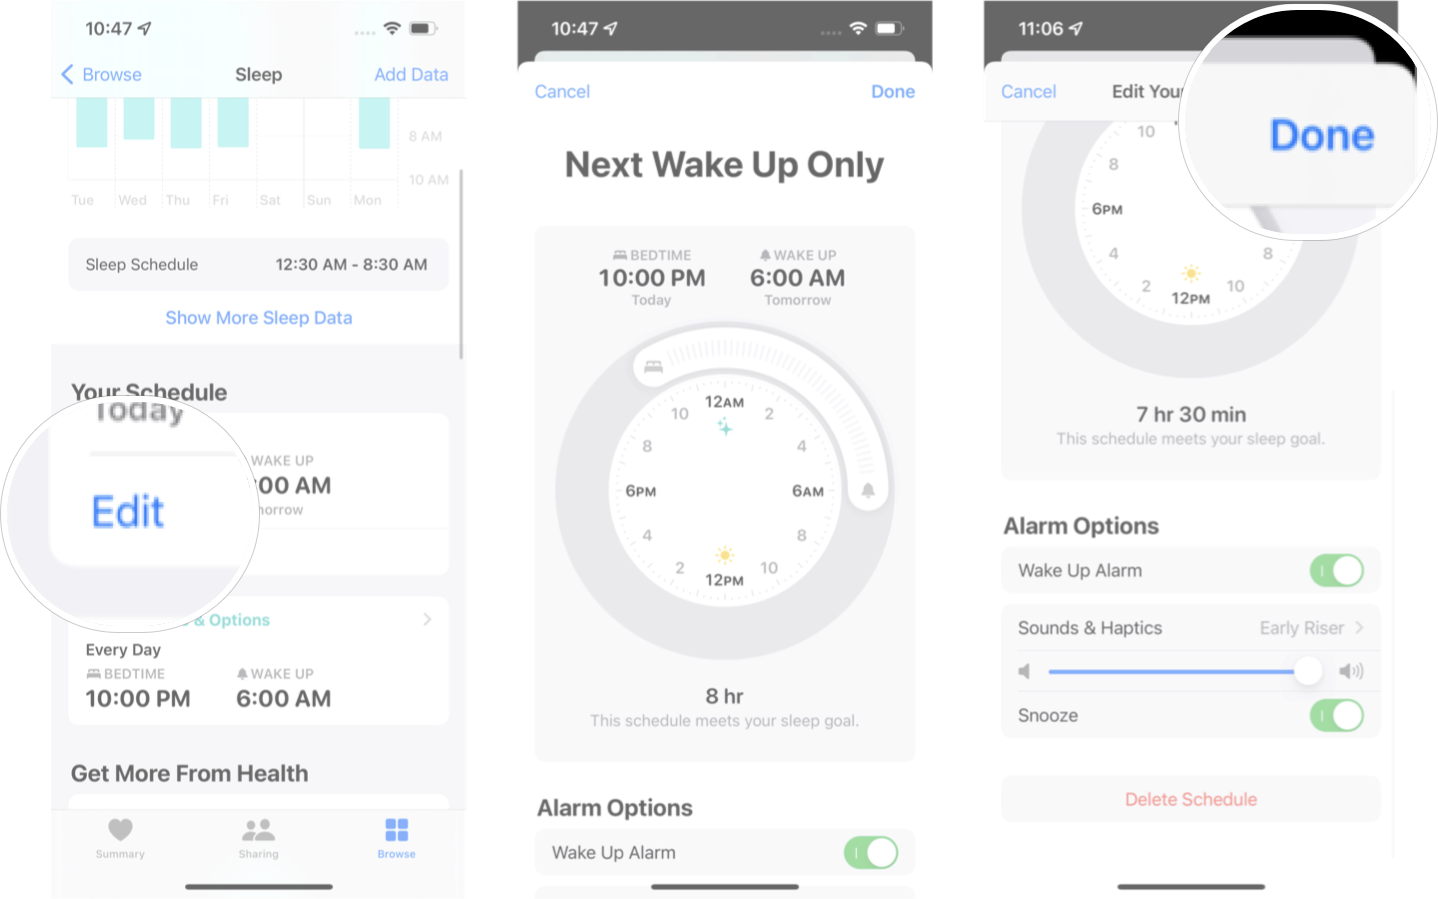 Editing A Sleep Schedule In iOS 15: Tap edit, adjust your sleep schedule to your liking, and then tap done.